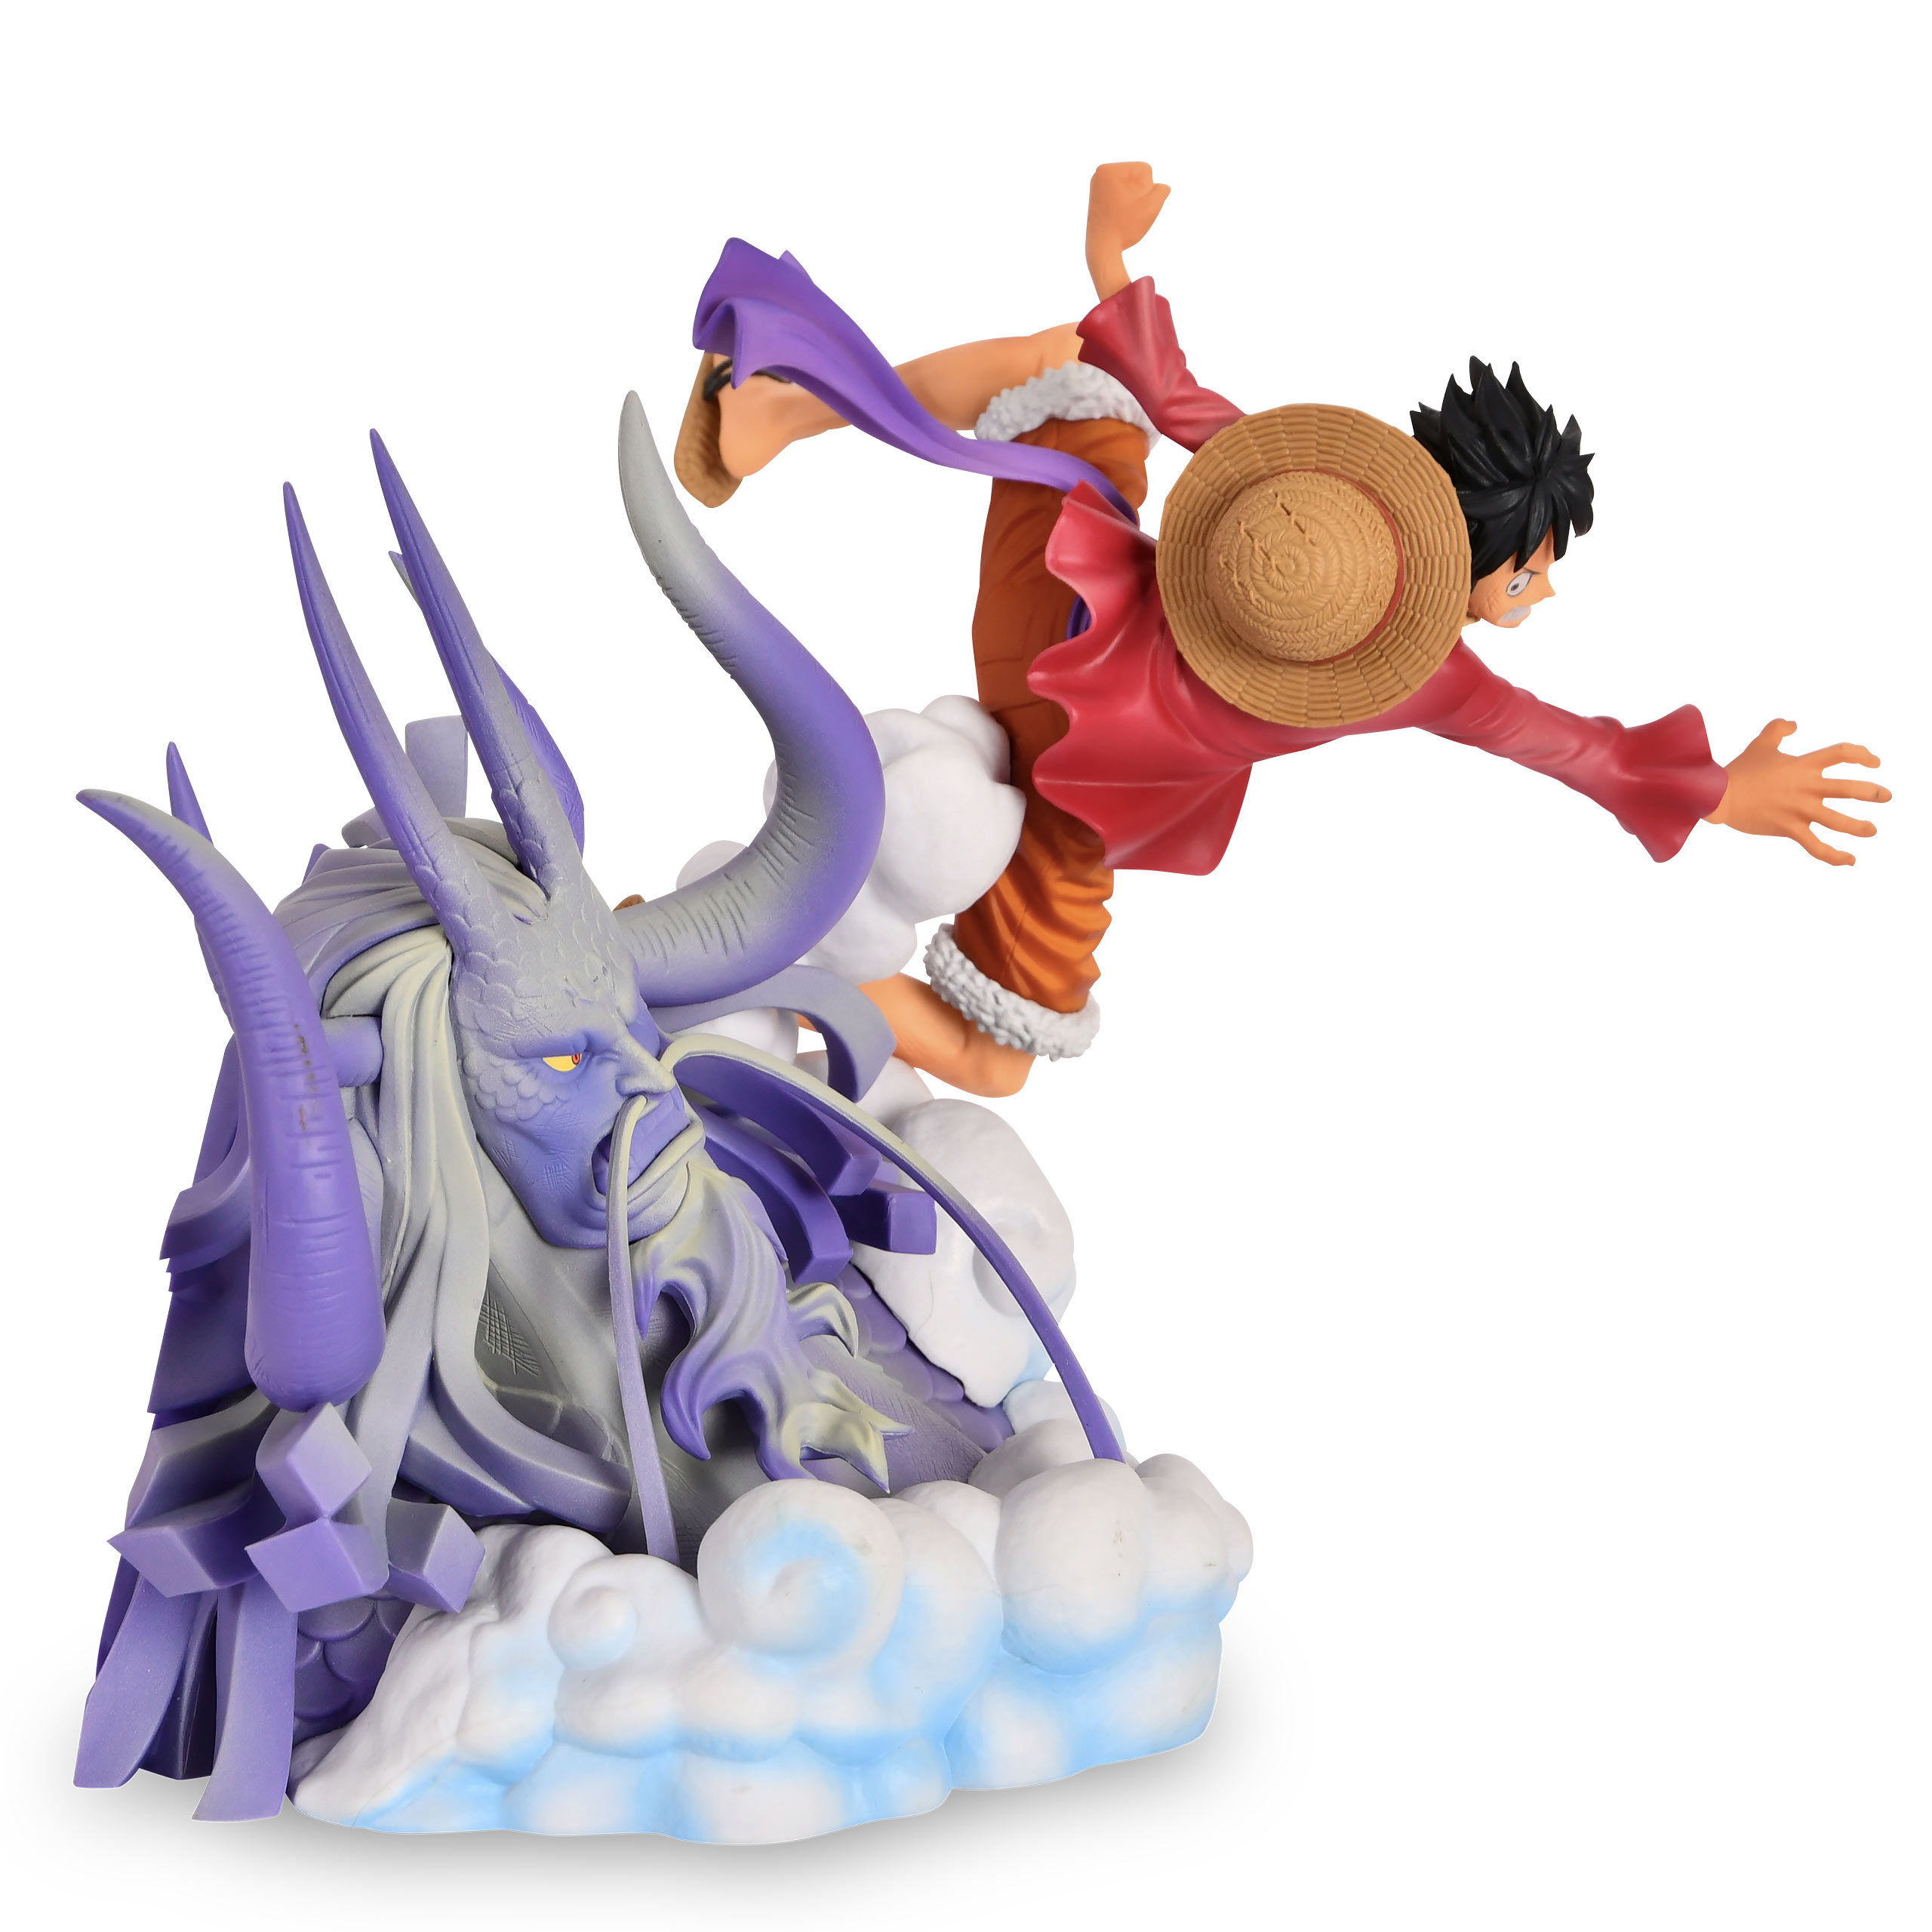 Monkey D. Luffy The Brush Dioramatic Figure - One Piece